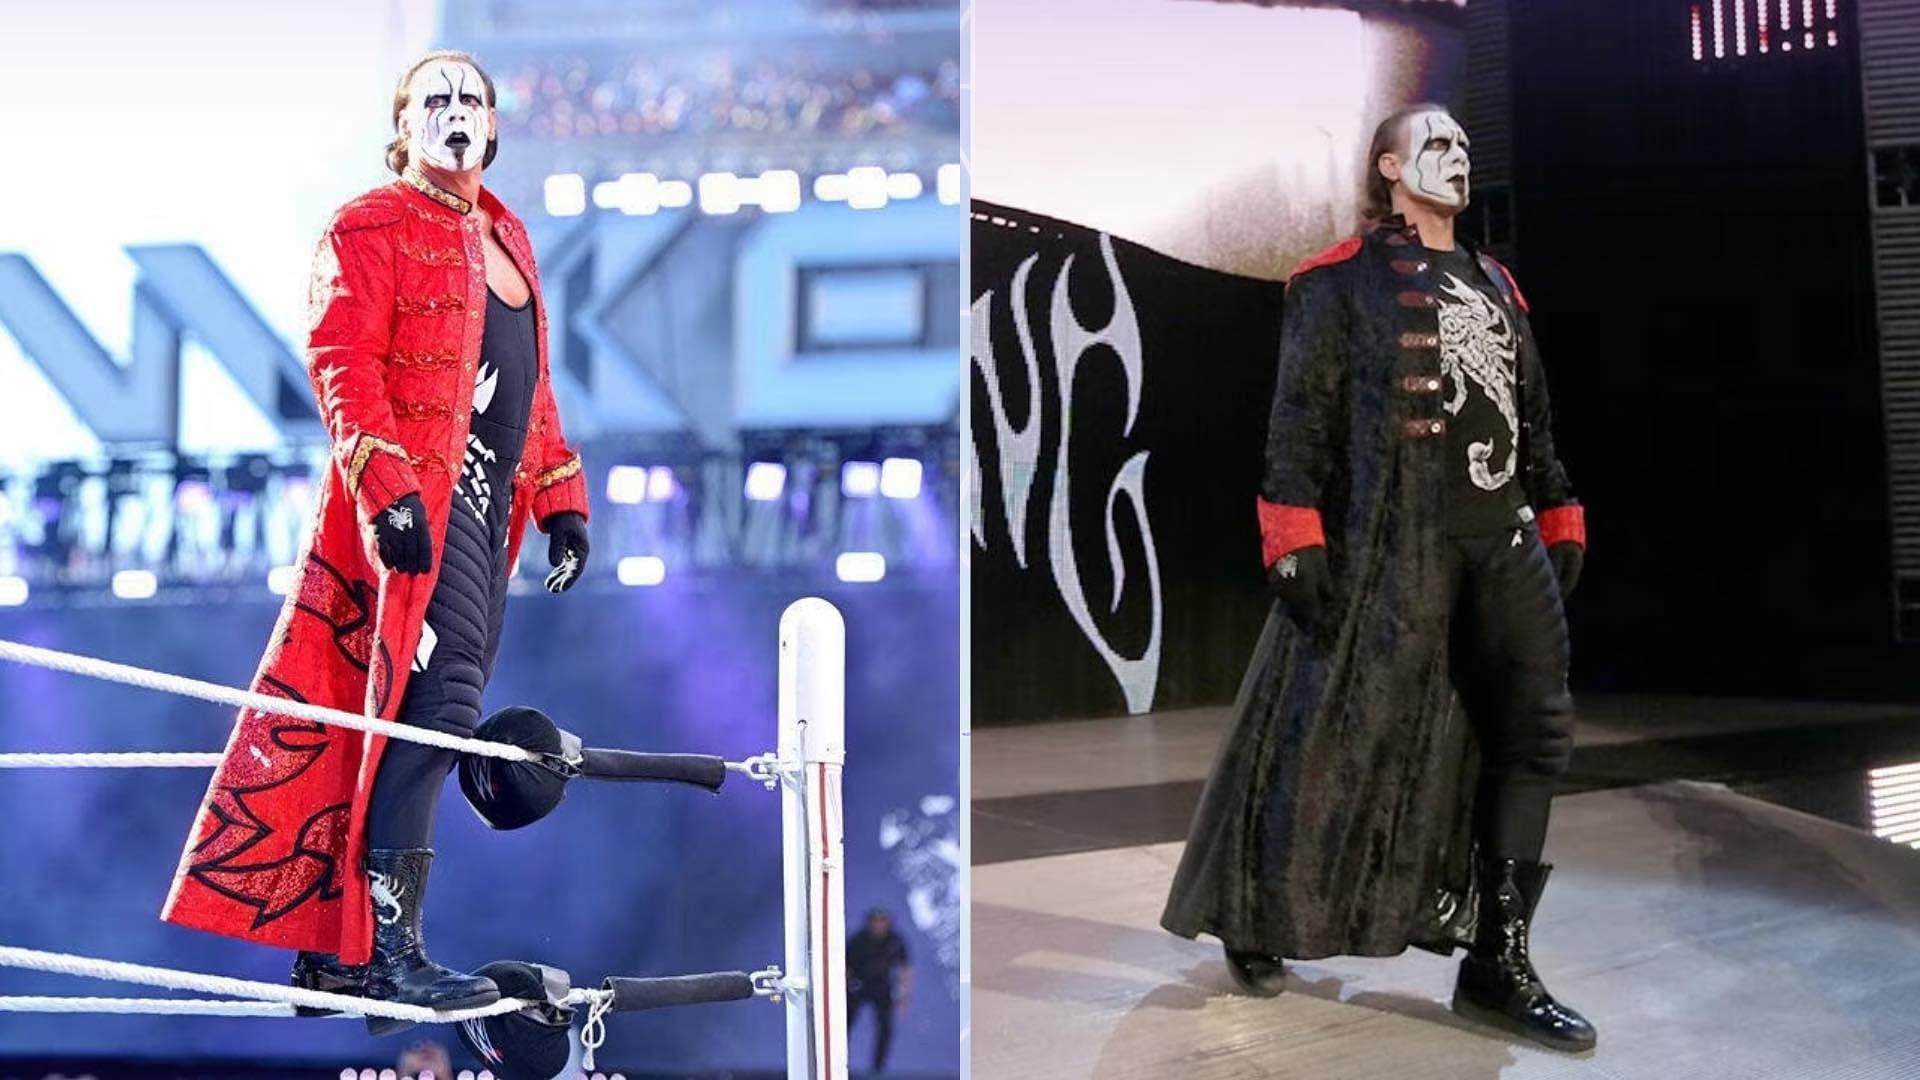 Sting wrestled his last match at the Revolution